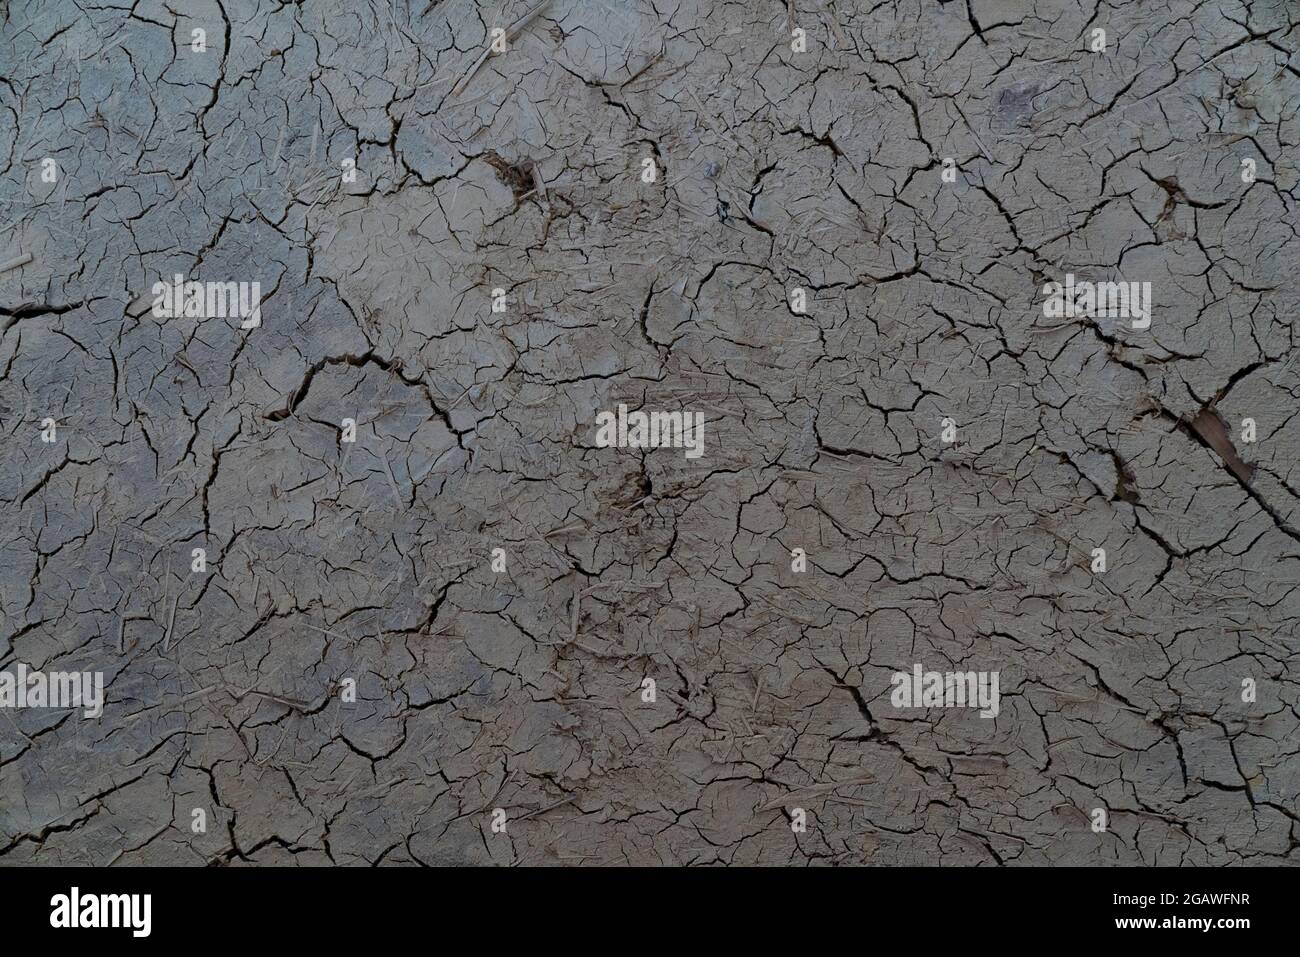 Cracked dry clay wall texture or background Stock Photo